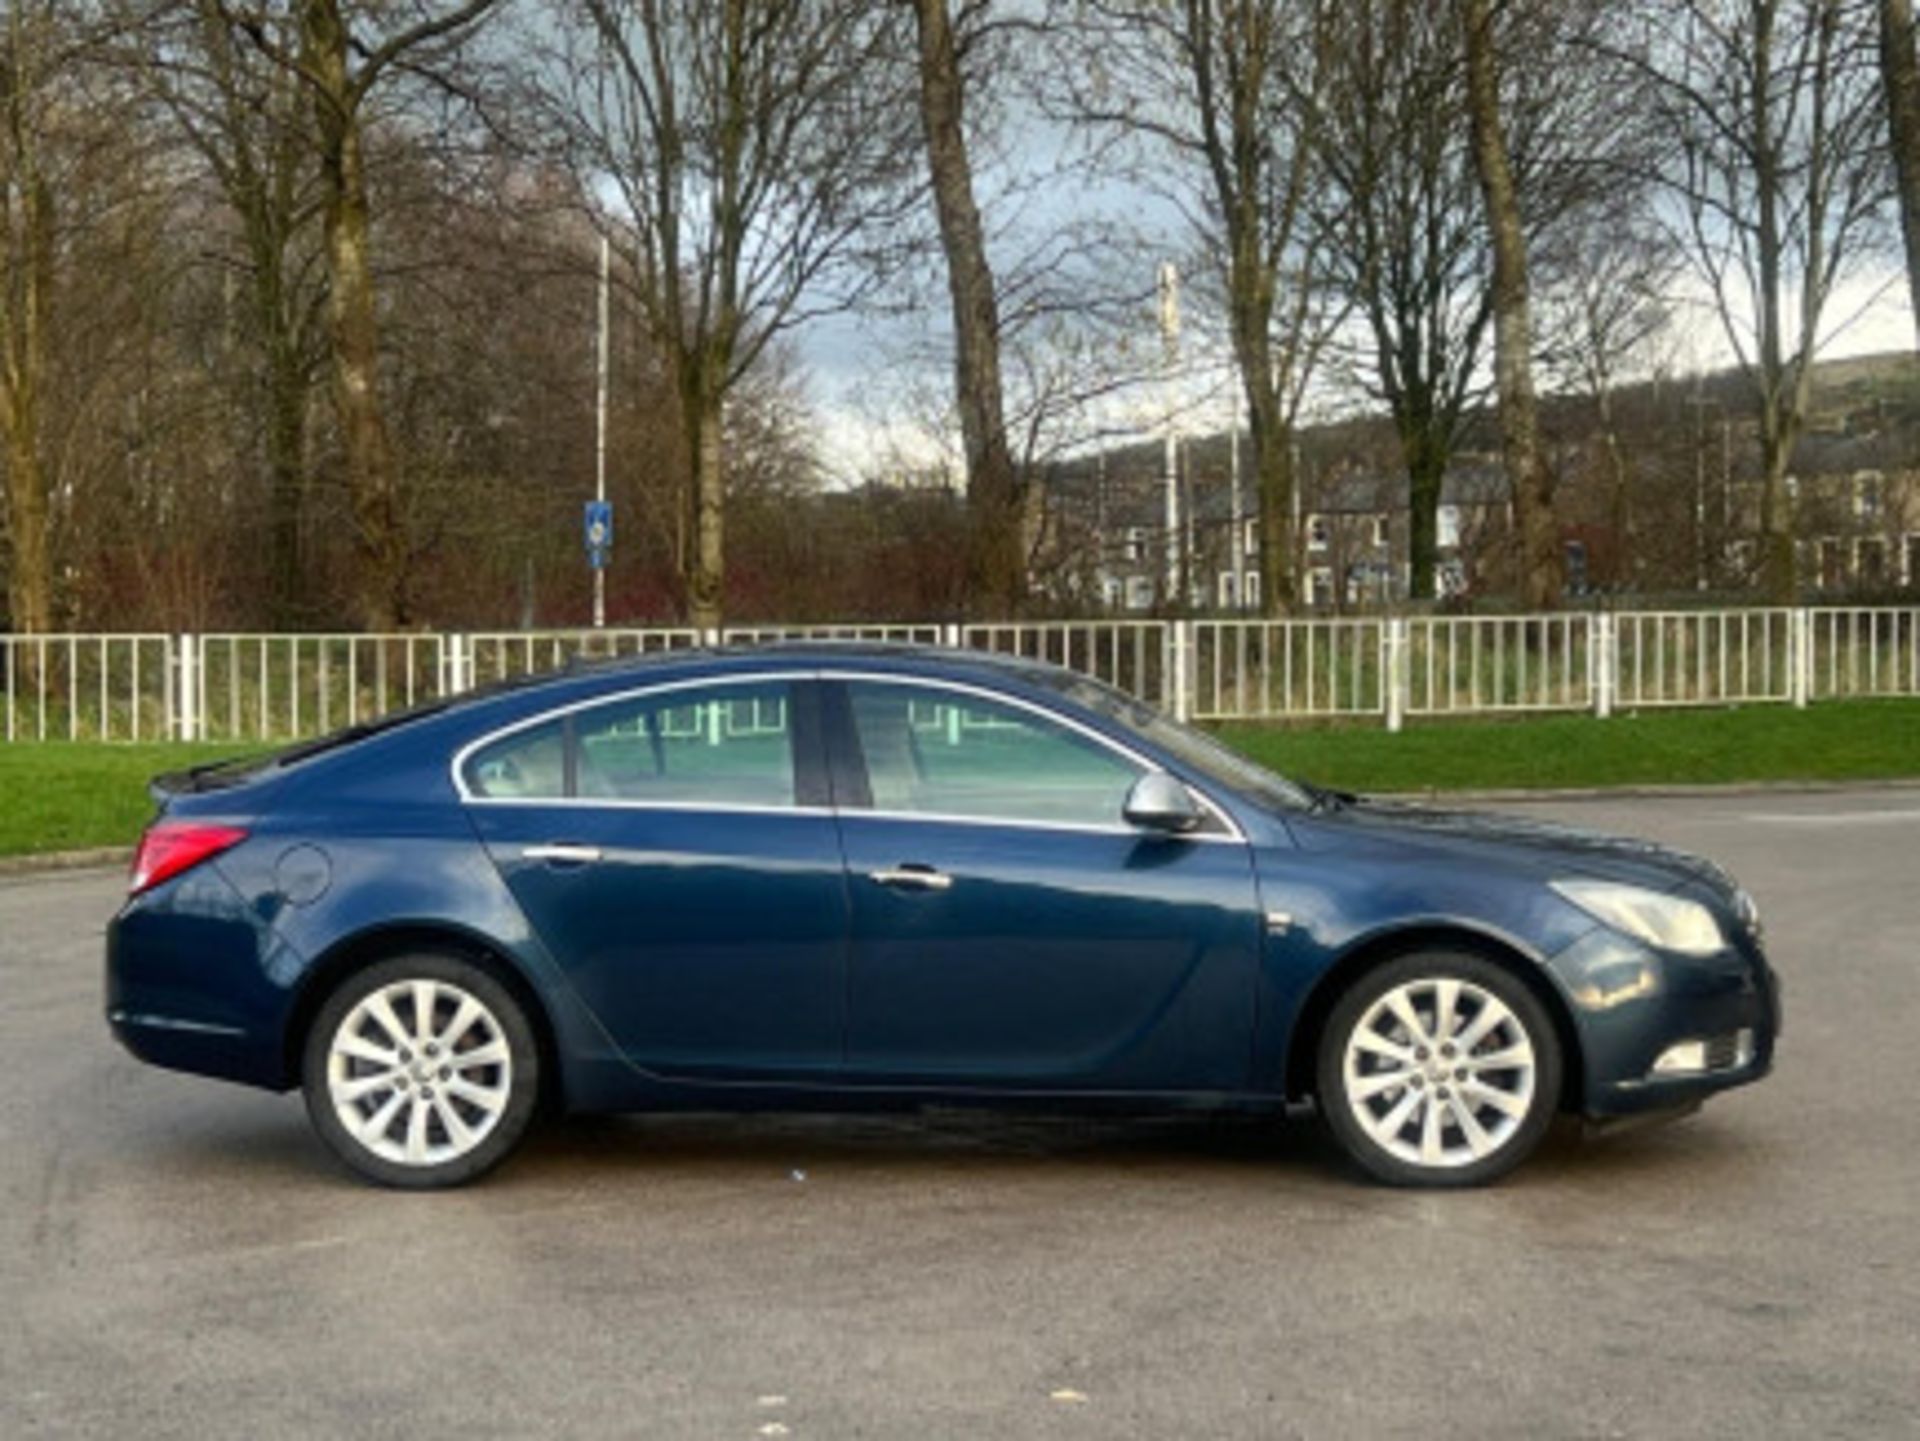 2012 VAUXHALL INSIGNIA 2.0 CDTI ELITE AUTO EURO 5 - DISCOVER EXCELLENCE >>--NO VAT ON HAMMER--<< - Image 57 of 120